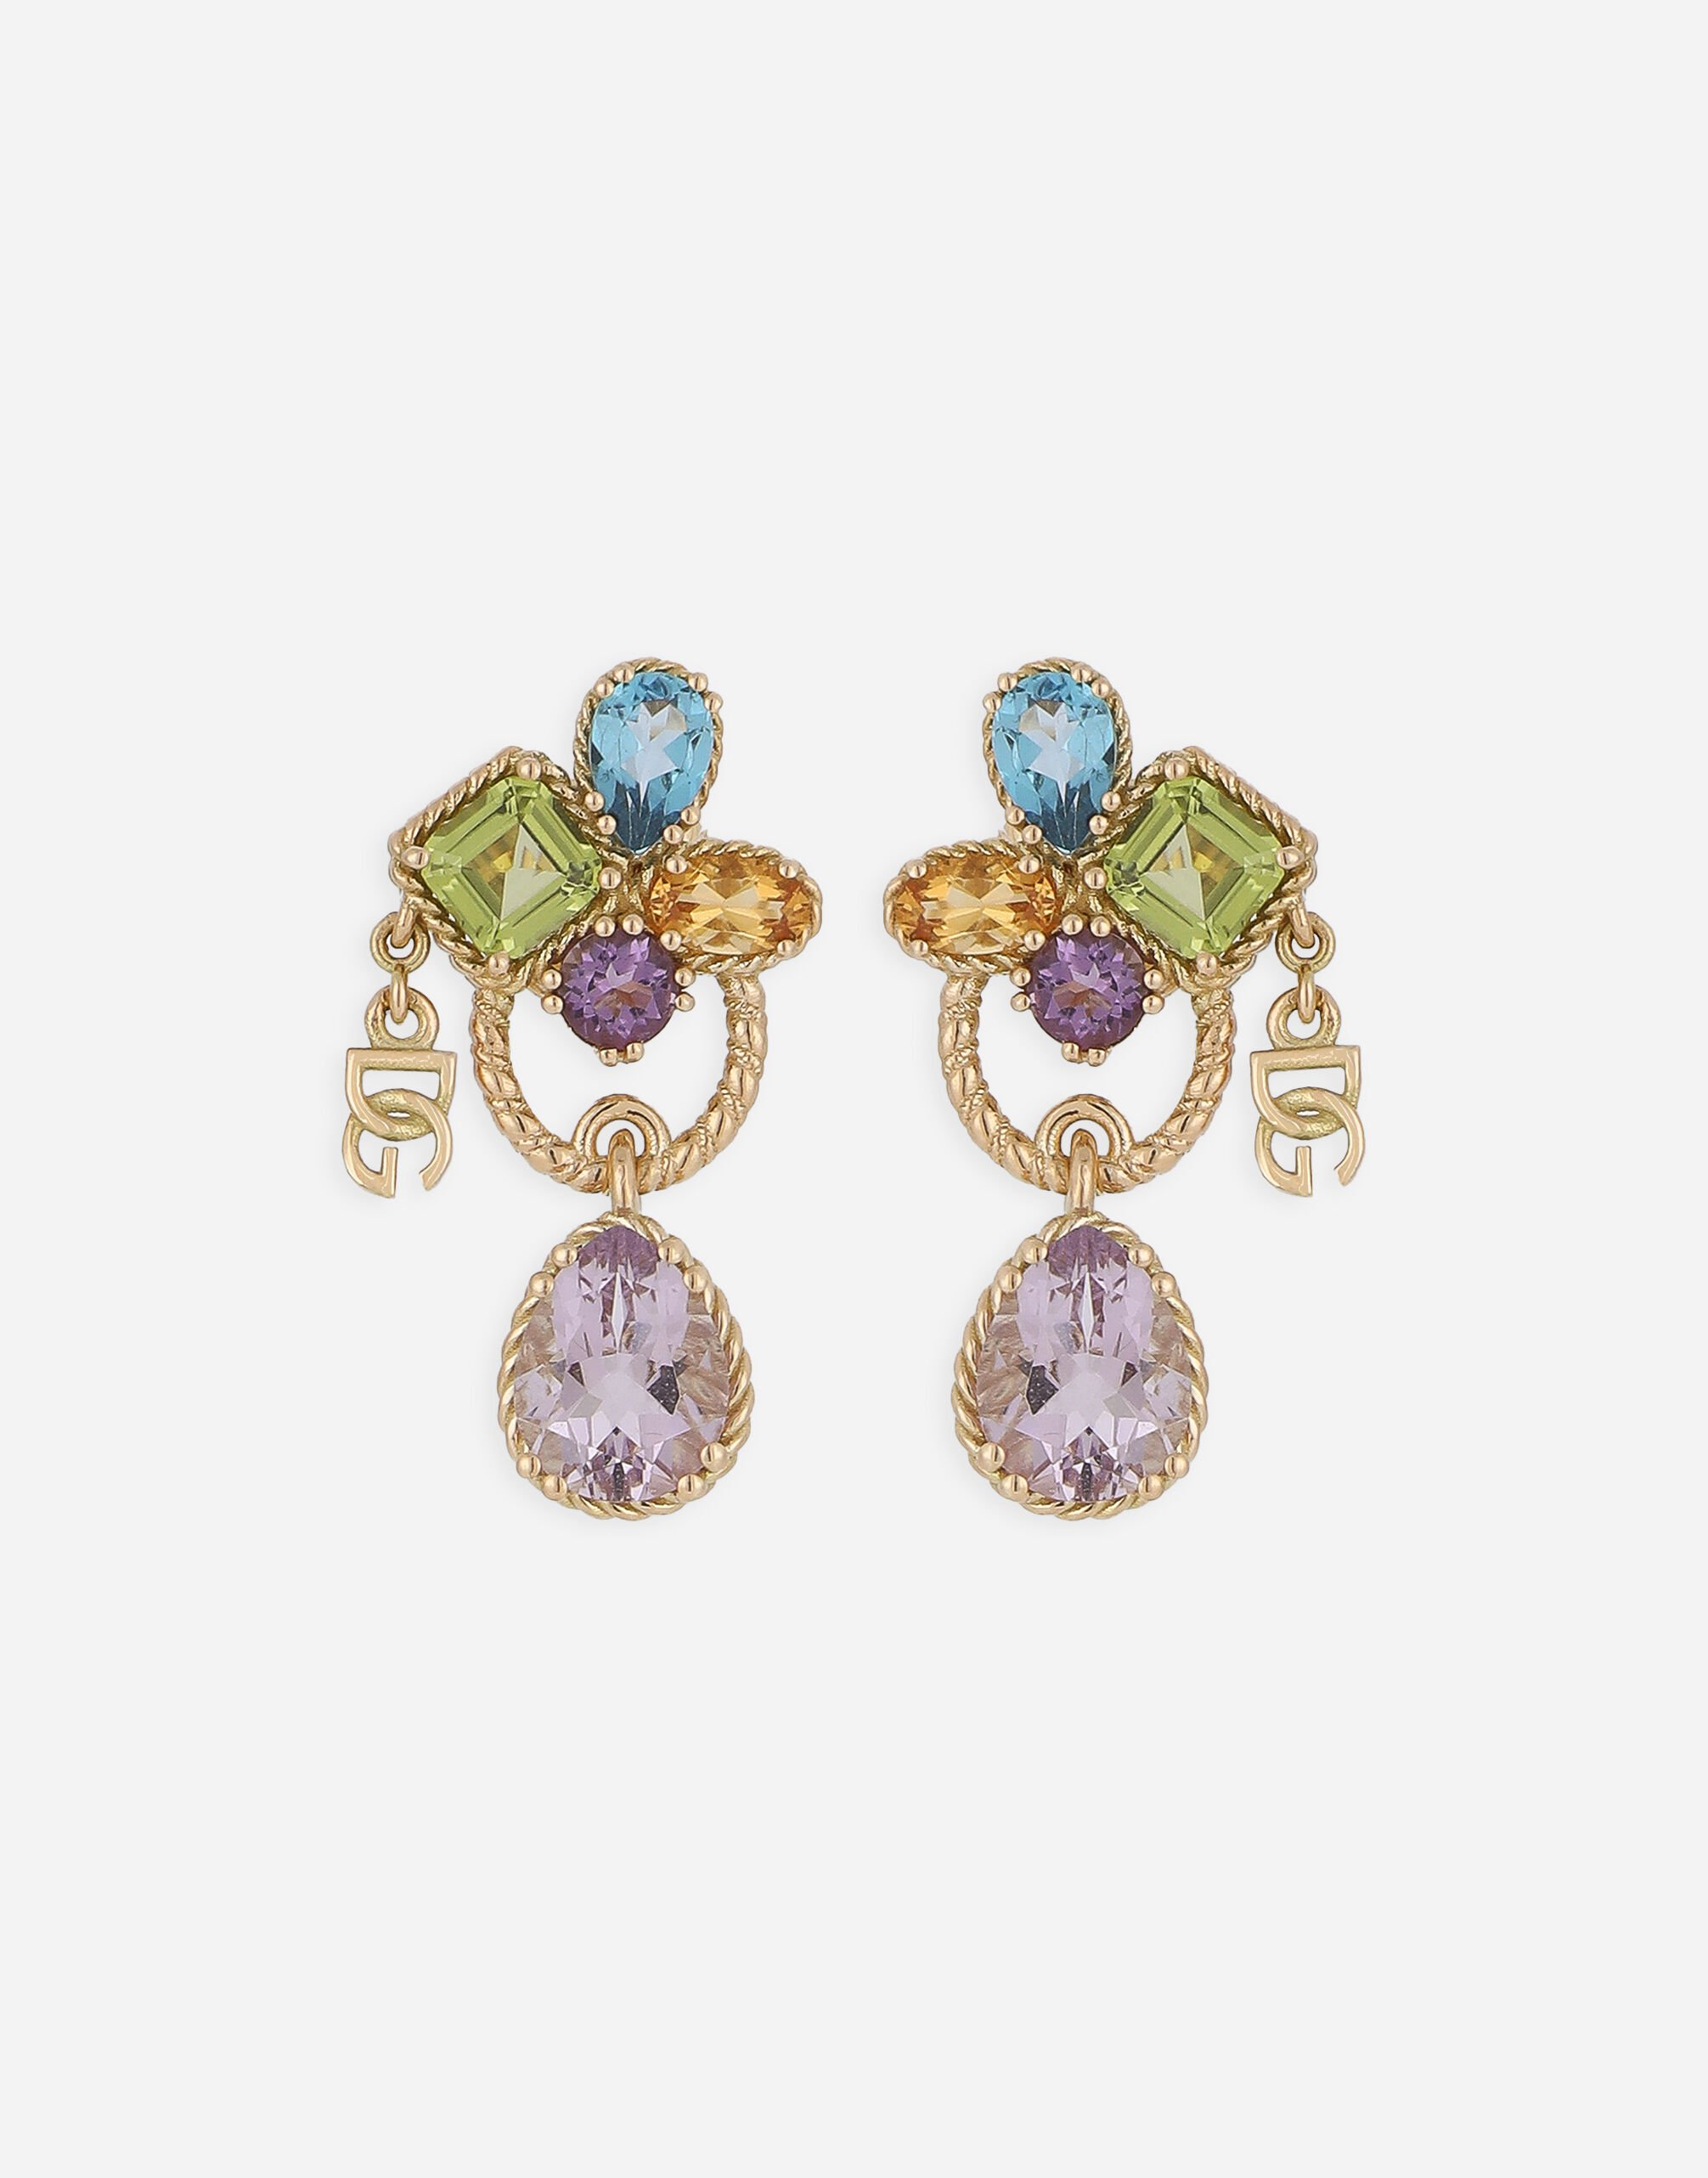 ${brand} 18kt yellow gold pierced earrings withmulticolors gemstones ${colorDescription} ${masterID}